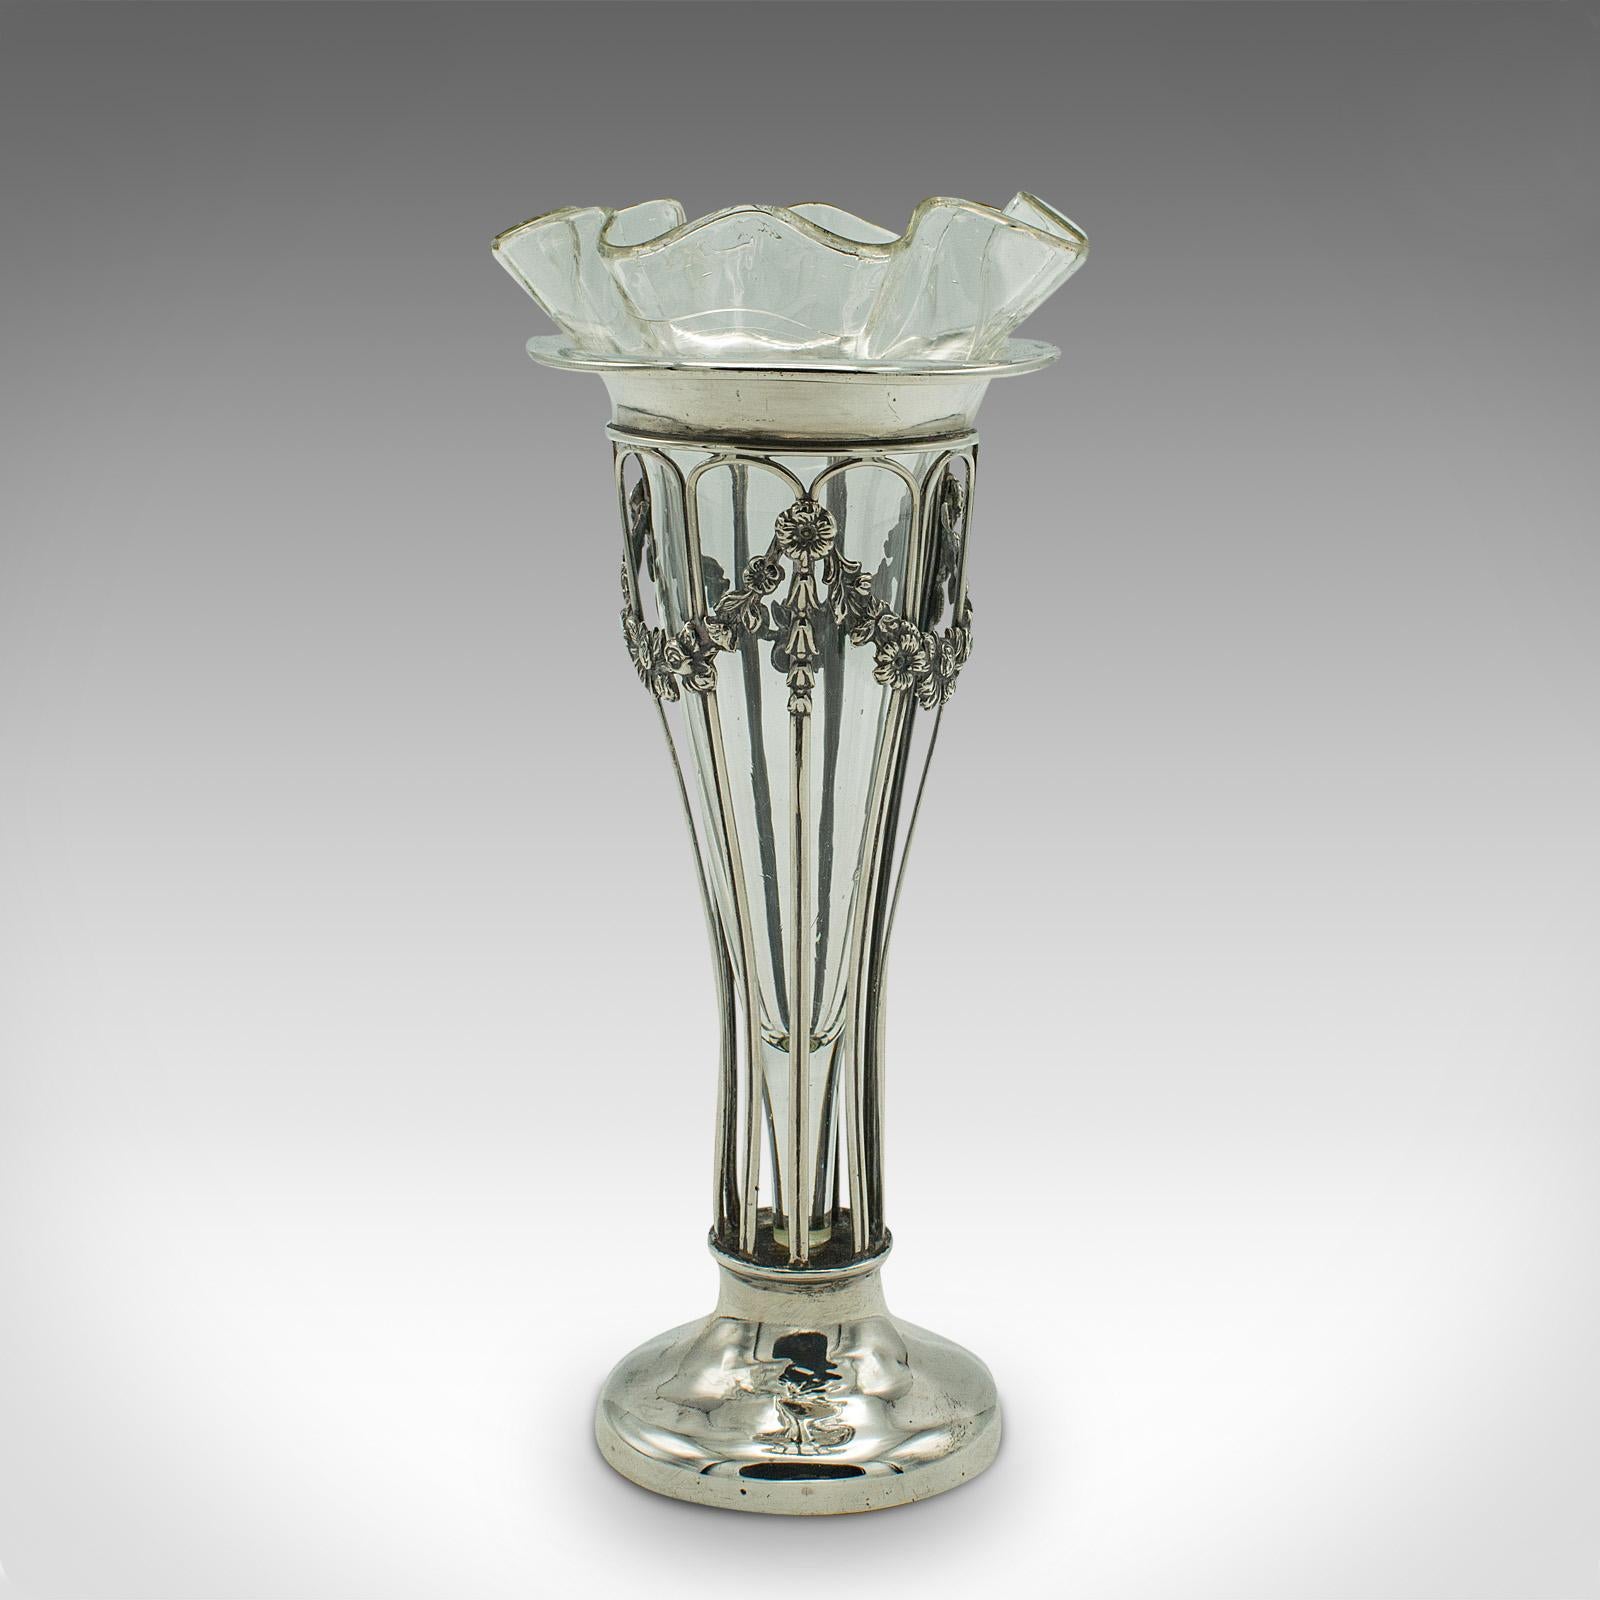 This is a small antique stem vase. An English, silver and glass decorative posy vase, dating to the Edwardian period, hallmarked 1906.
 
Expressive Art Nouveau form and appealing finish to this diminutive vase
Displays a desirable aged patina and